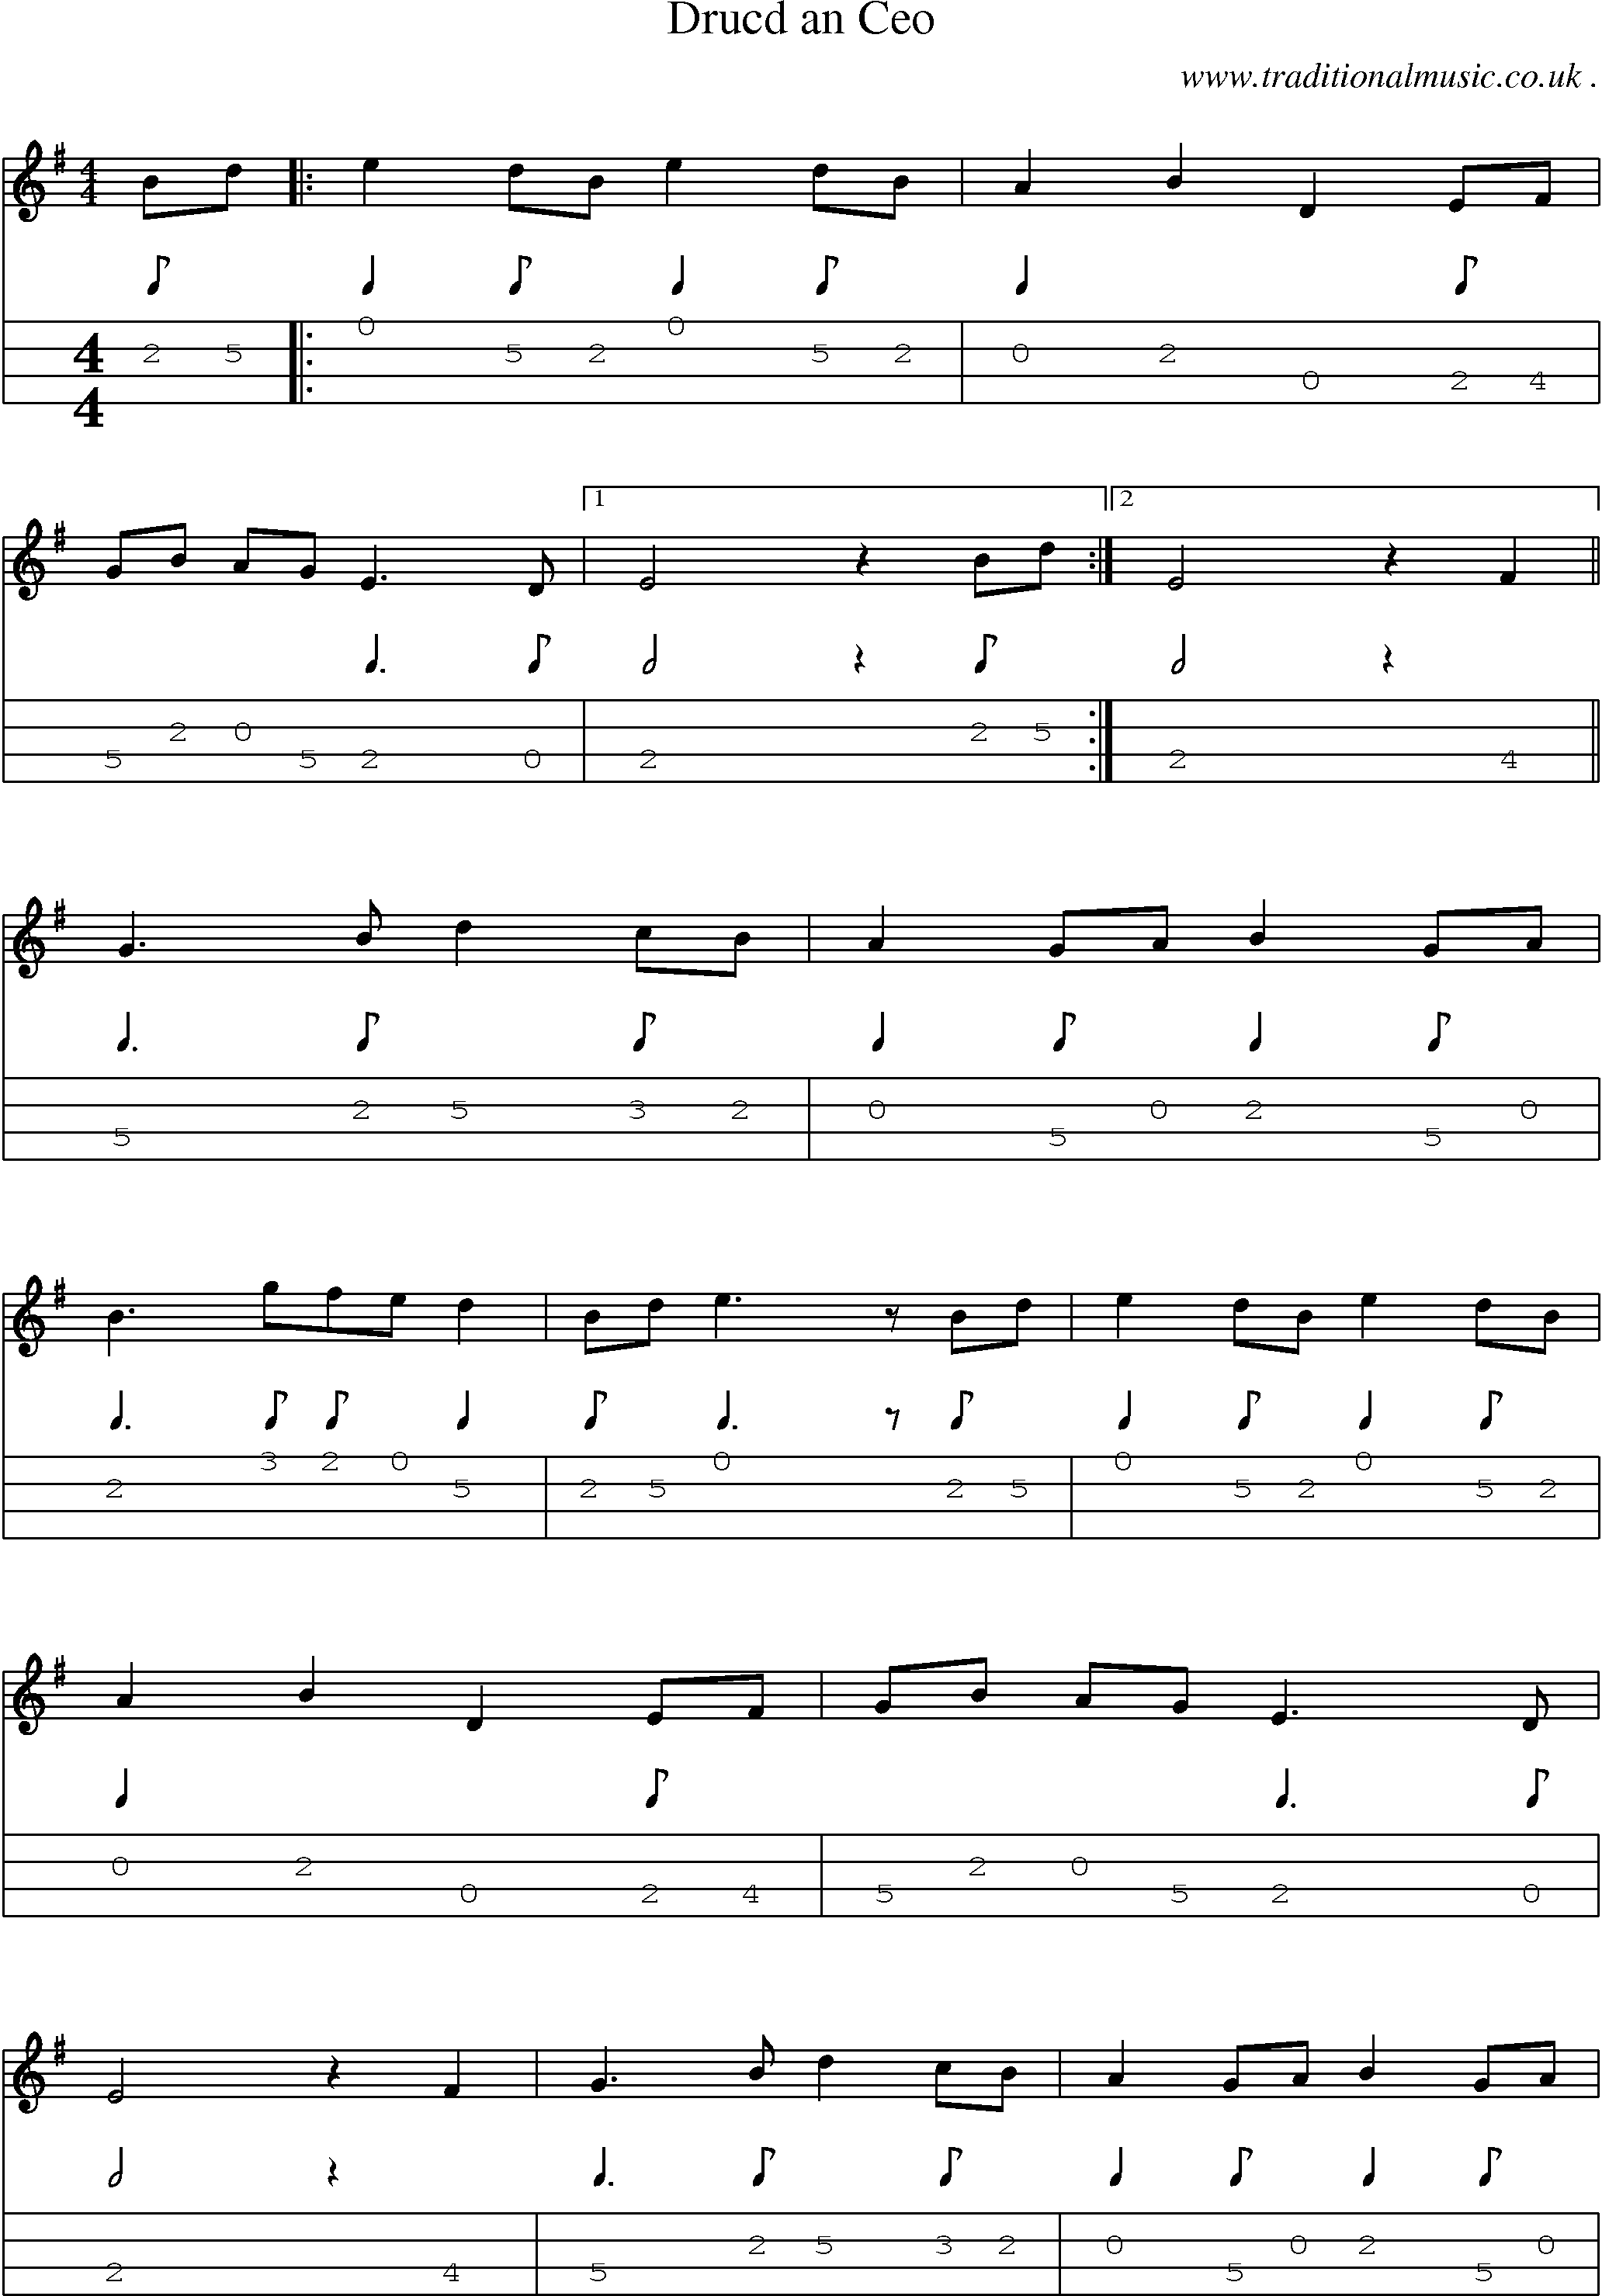 Sheet-Music and Mandolin Tabs for Drucd An Ceo